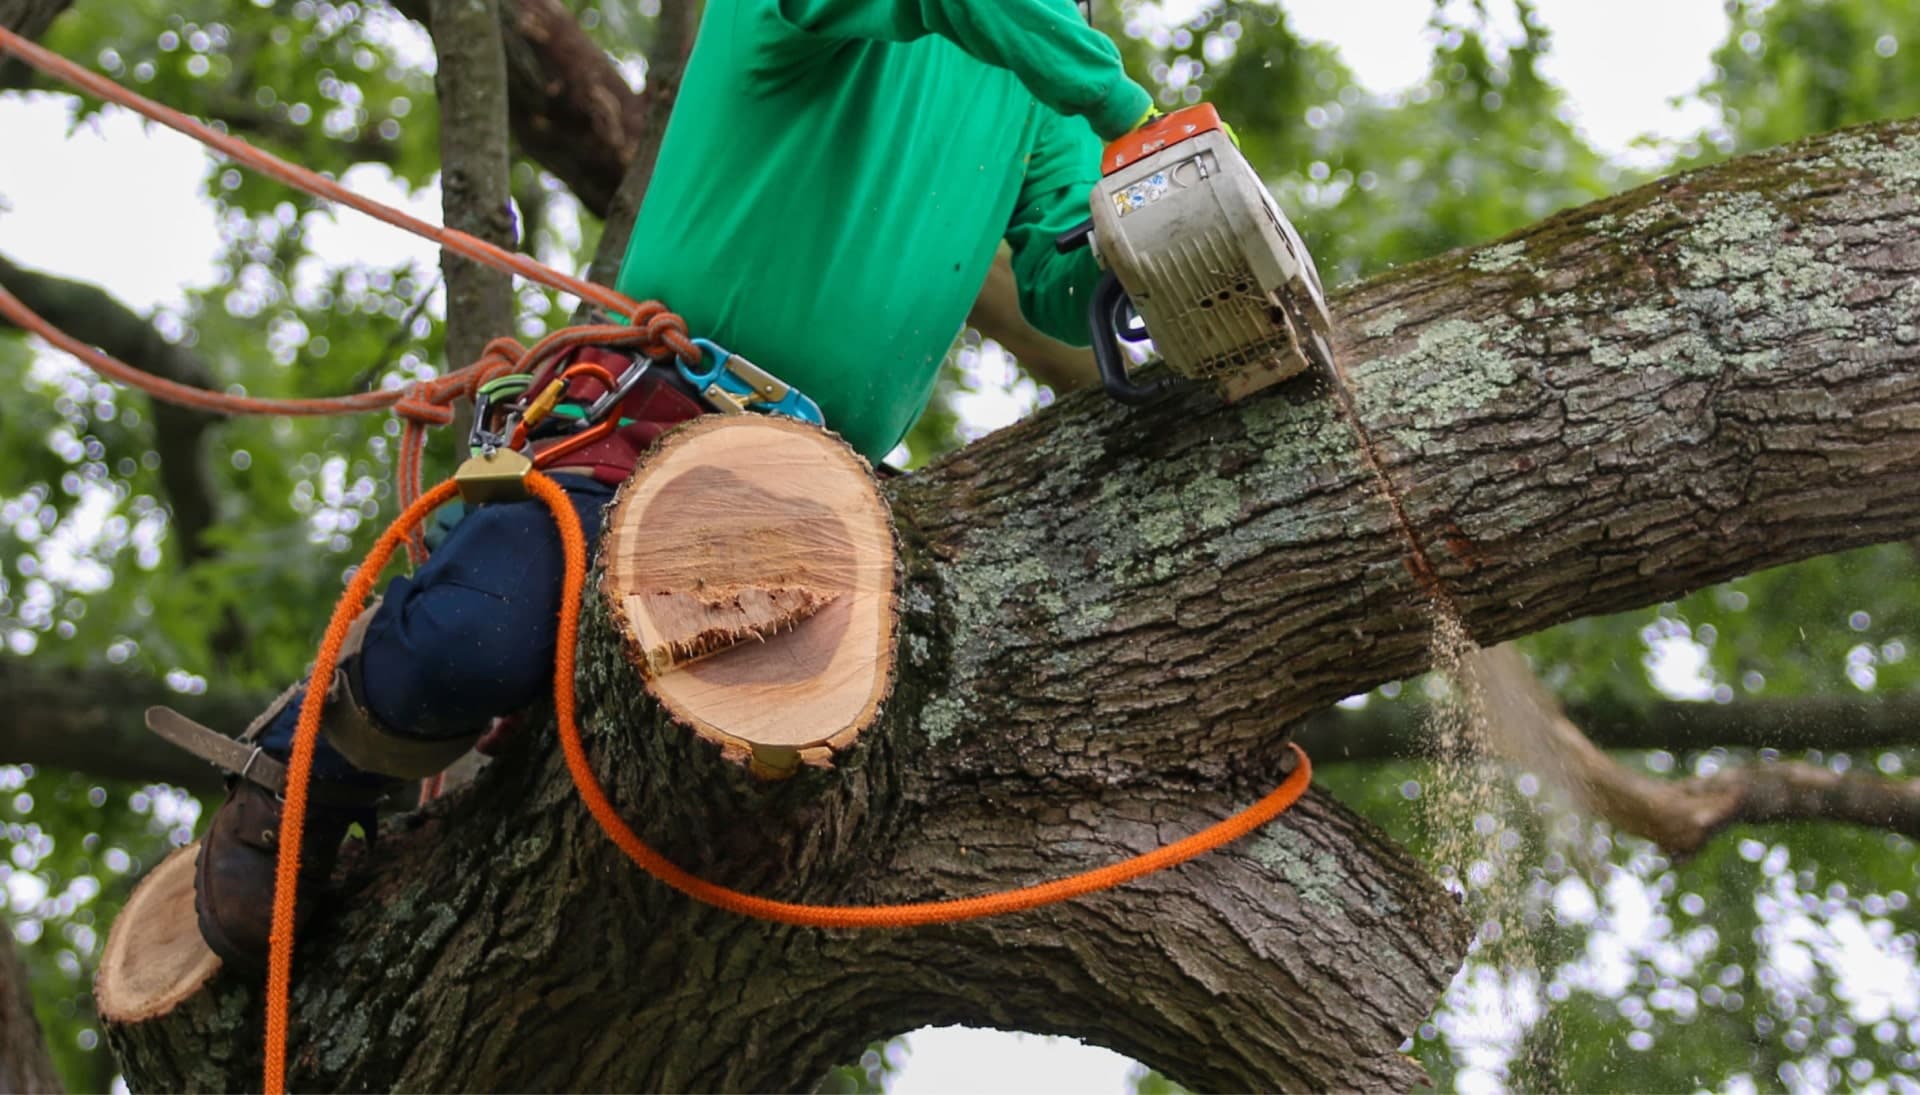 Shed your worries away with best tree removal in Mesa